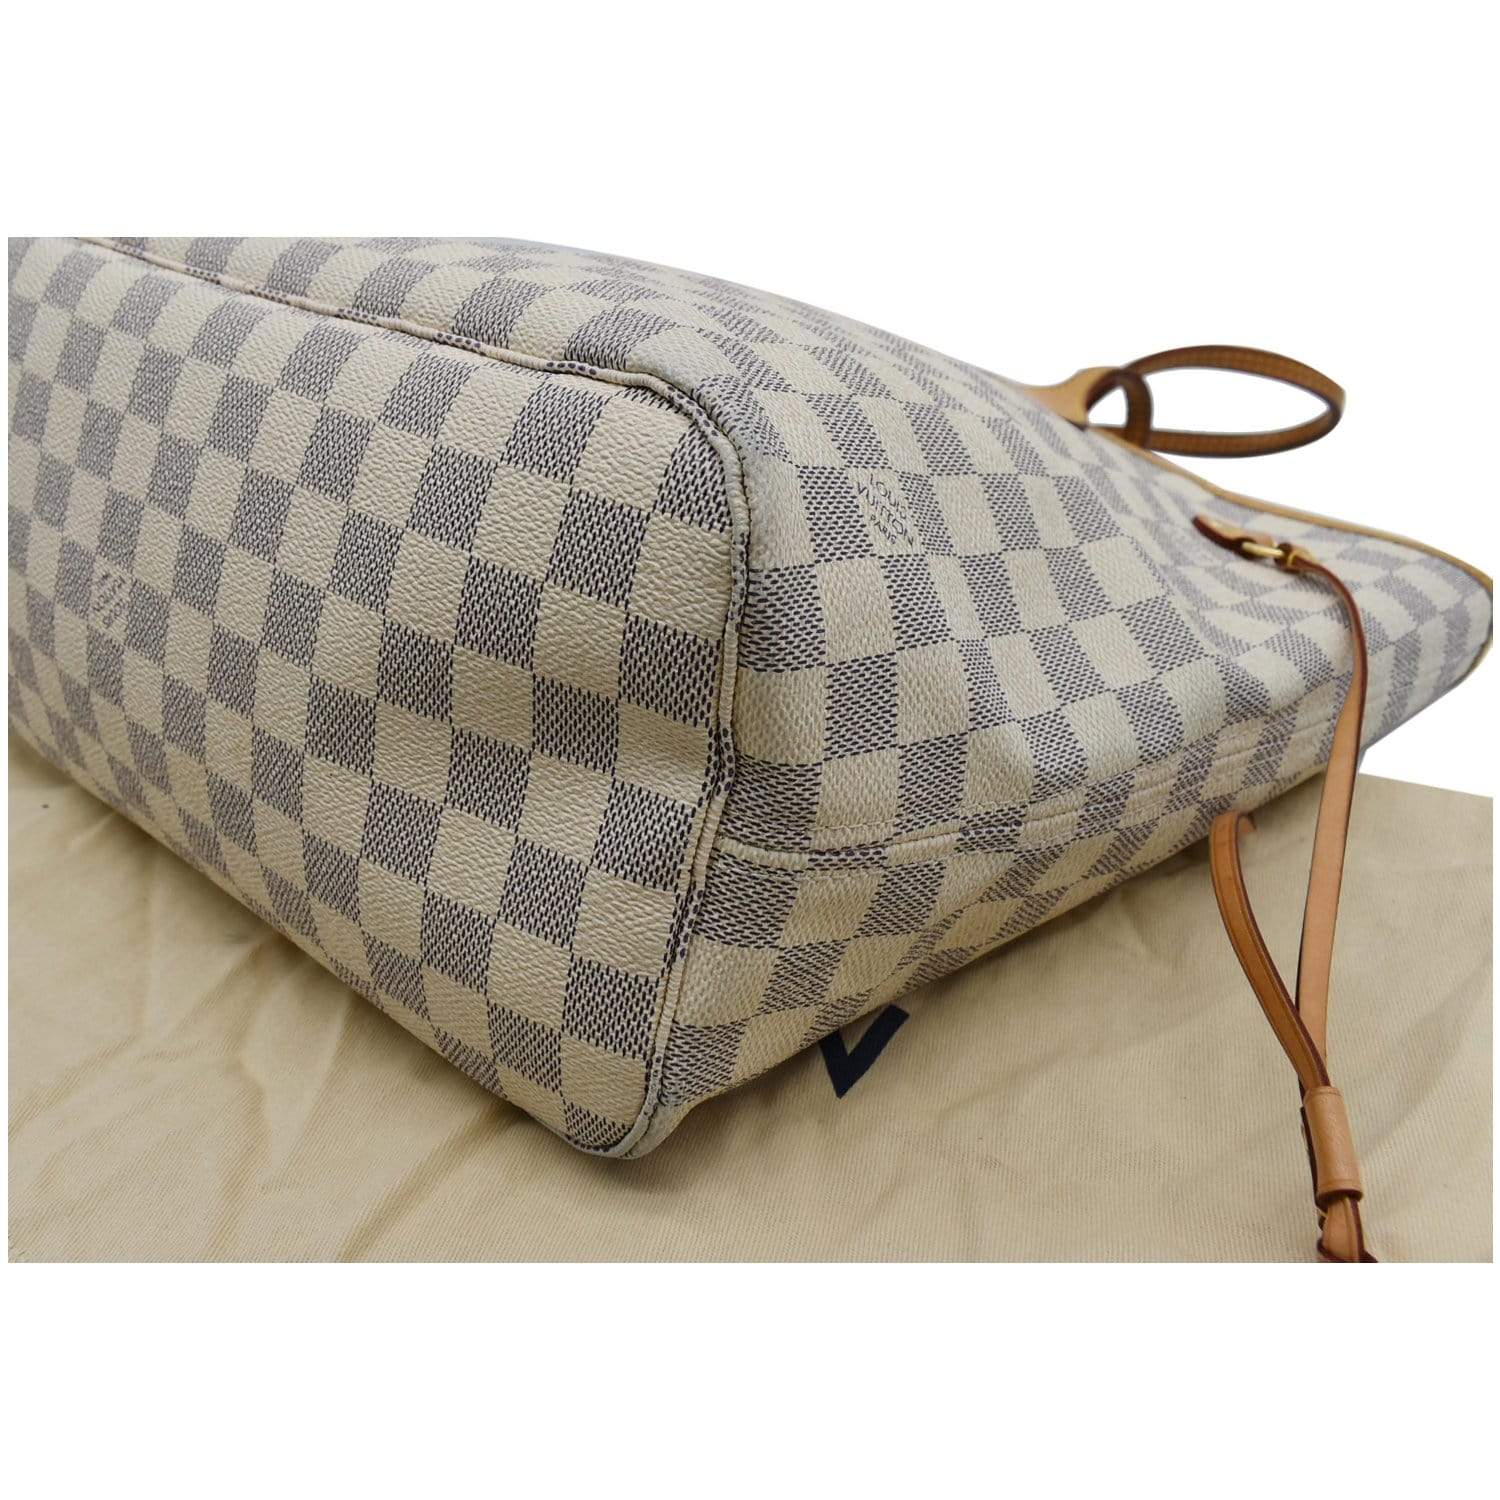 LOUIS VUITTON Neverfull MM Shoulder tote bag N41358｜Product  Code：2101214610011｜BRAND OFF Online Store